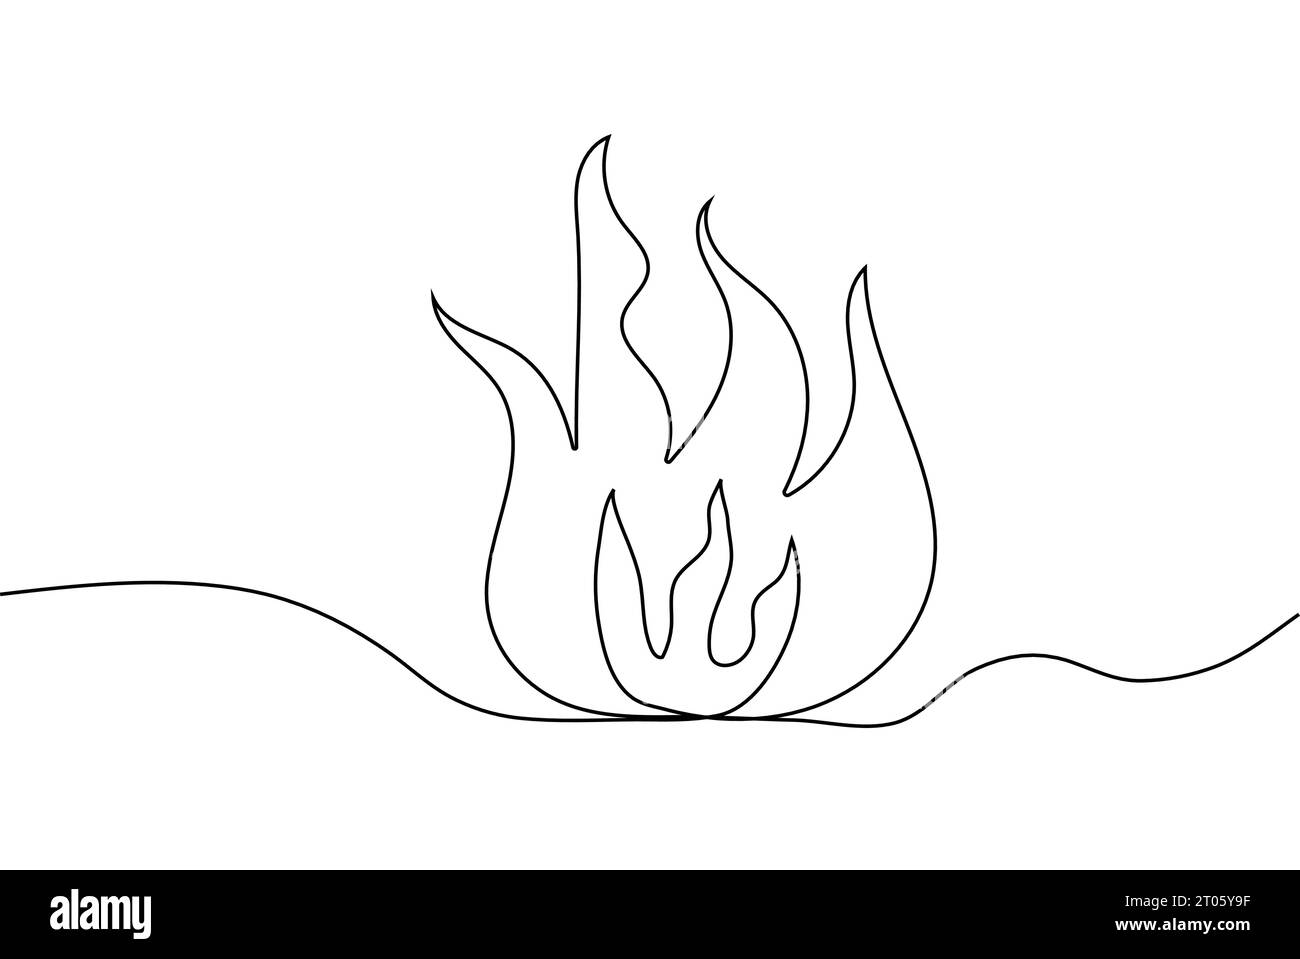 Fire in continuous line style. Flame line art vector illustration Stock Vector